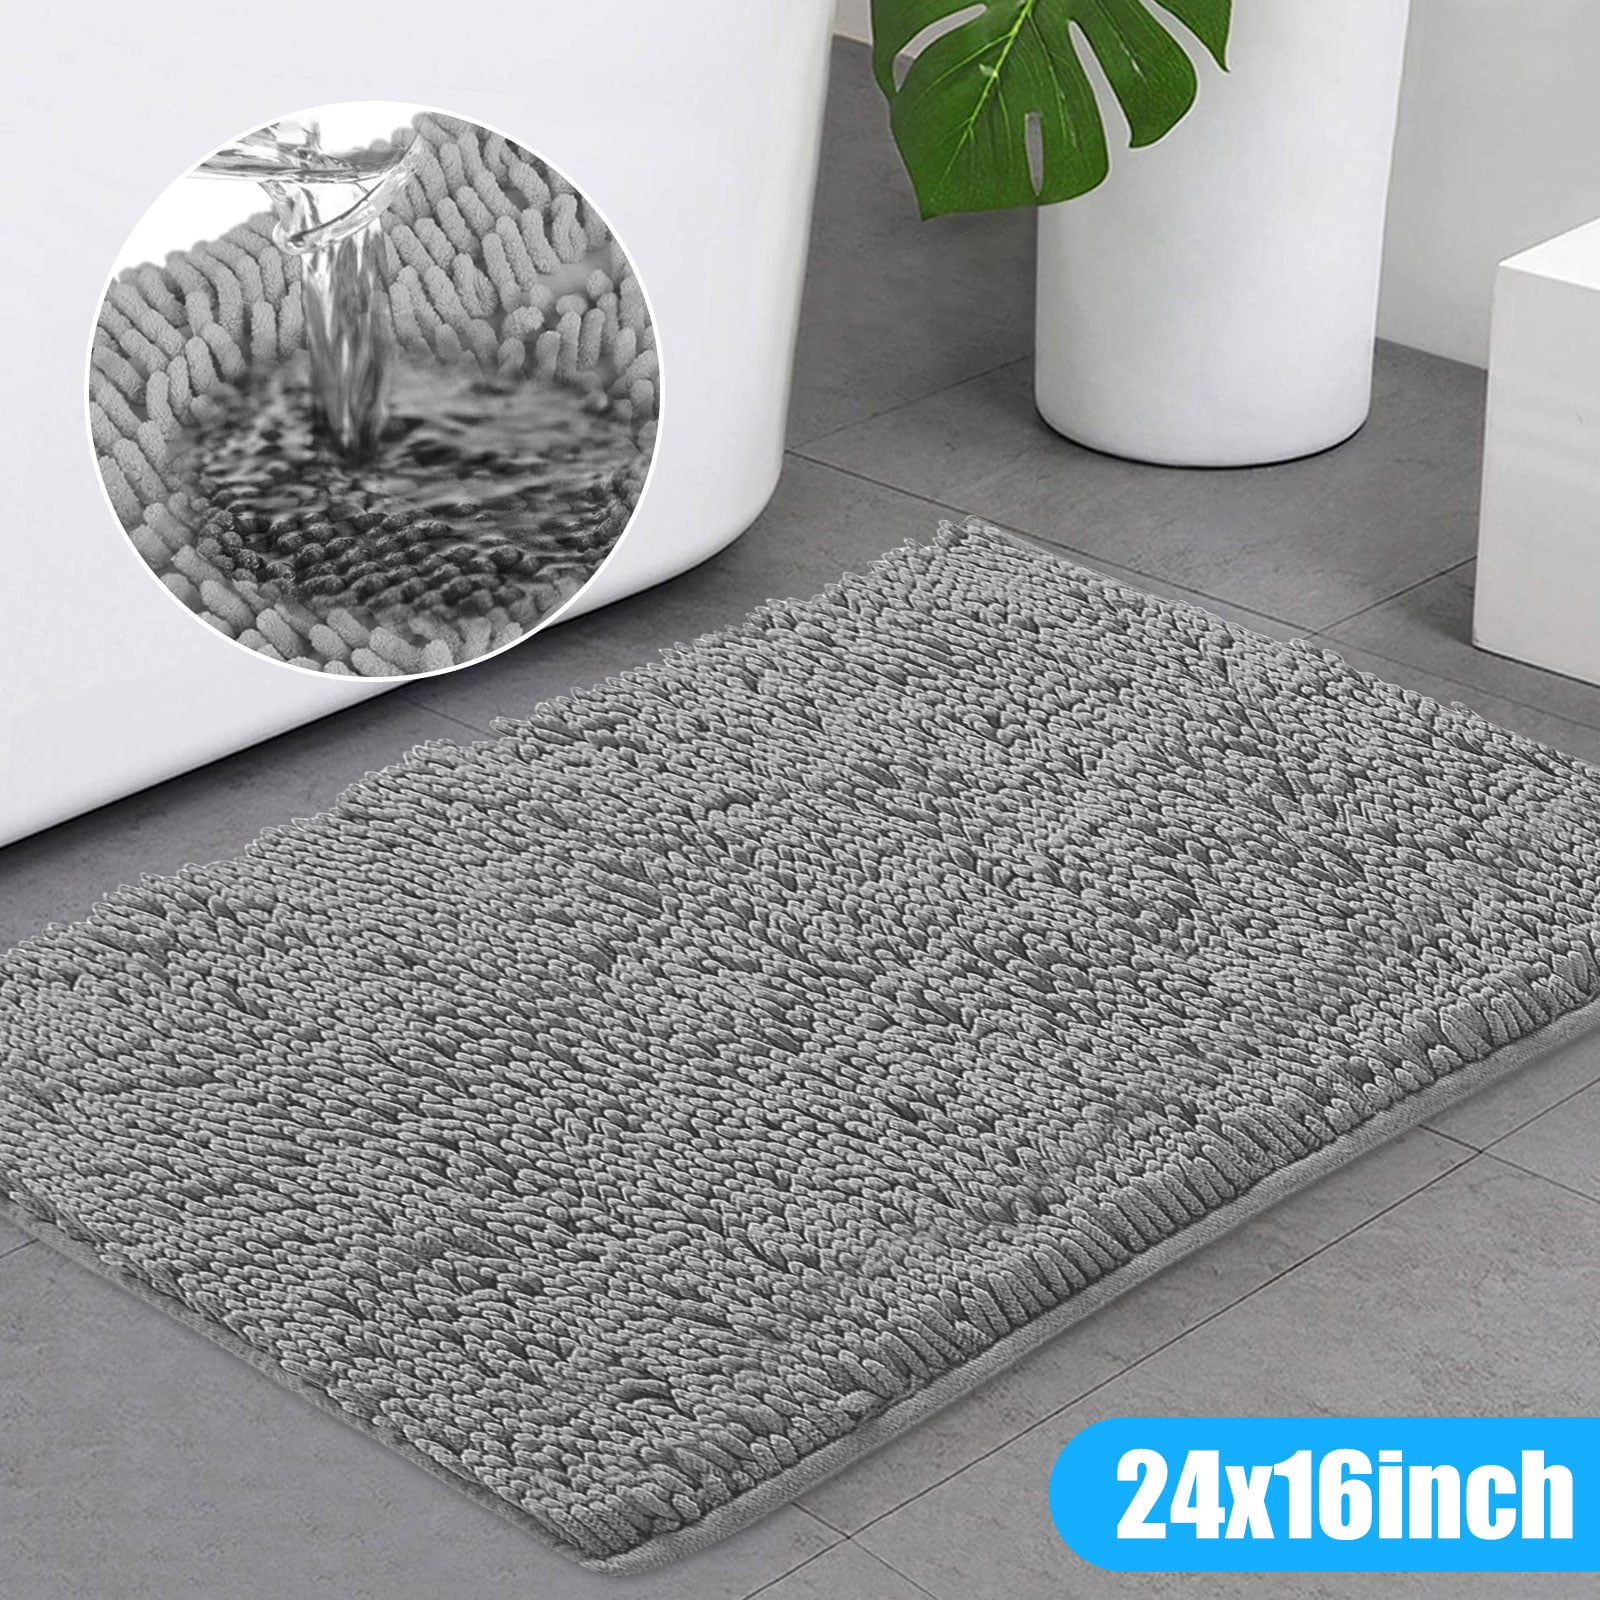 Bathroom Anti-skid Mat Water Absorbent Carpet Washable Chenille Cushion Rugs US 